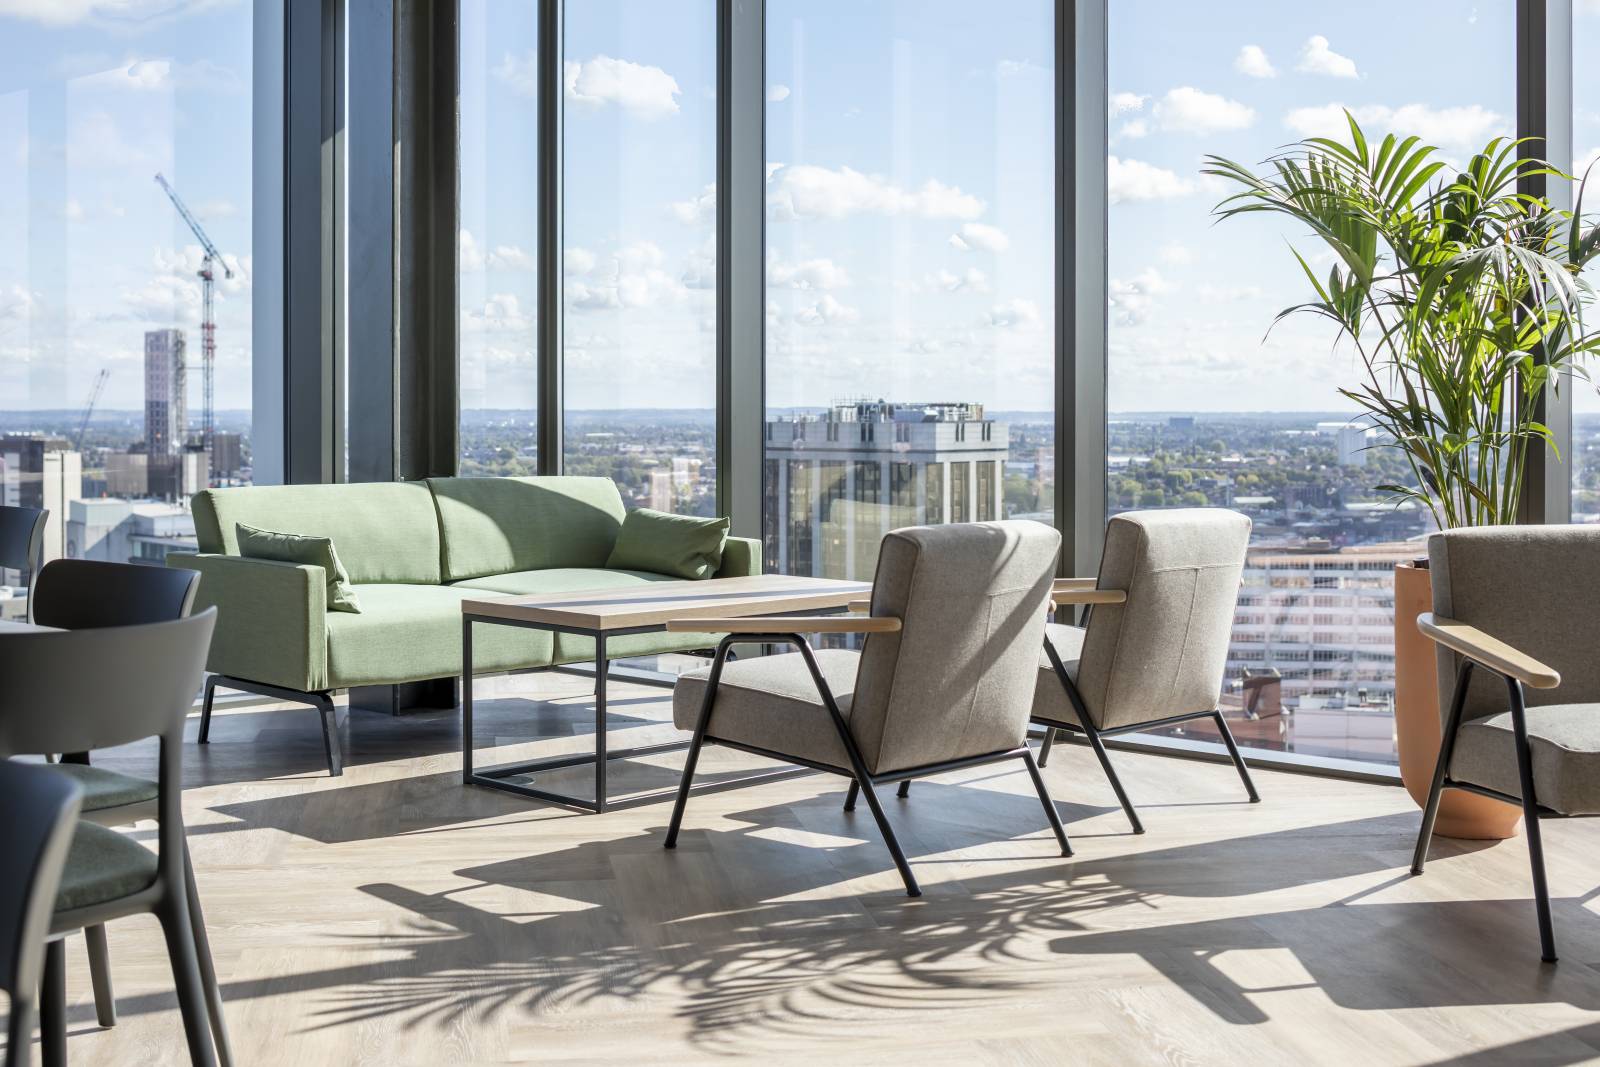 Connection Resimercial range Camden lounge chair Leo sofa and Forge table Arcadis Birmingham collaborative work spaces for employee wellbeing